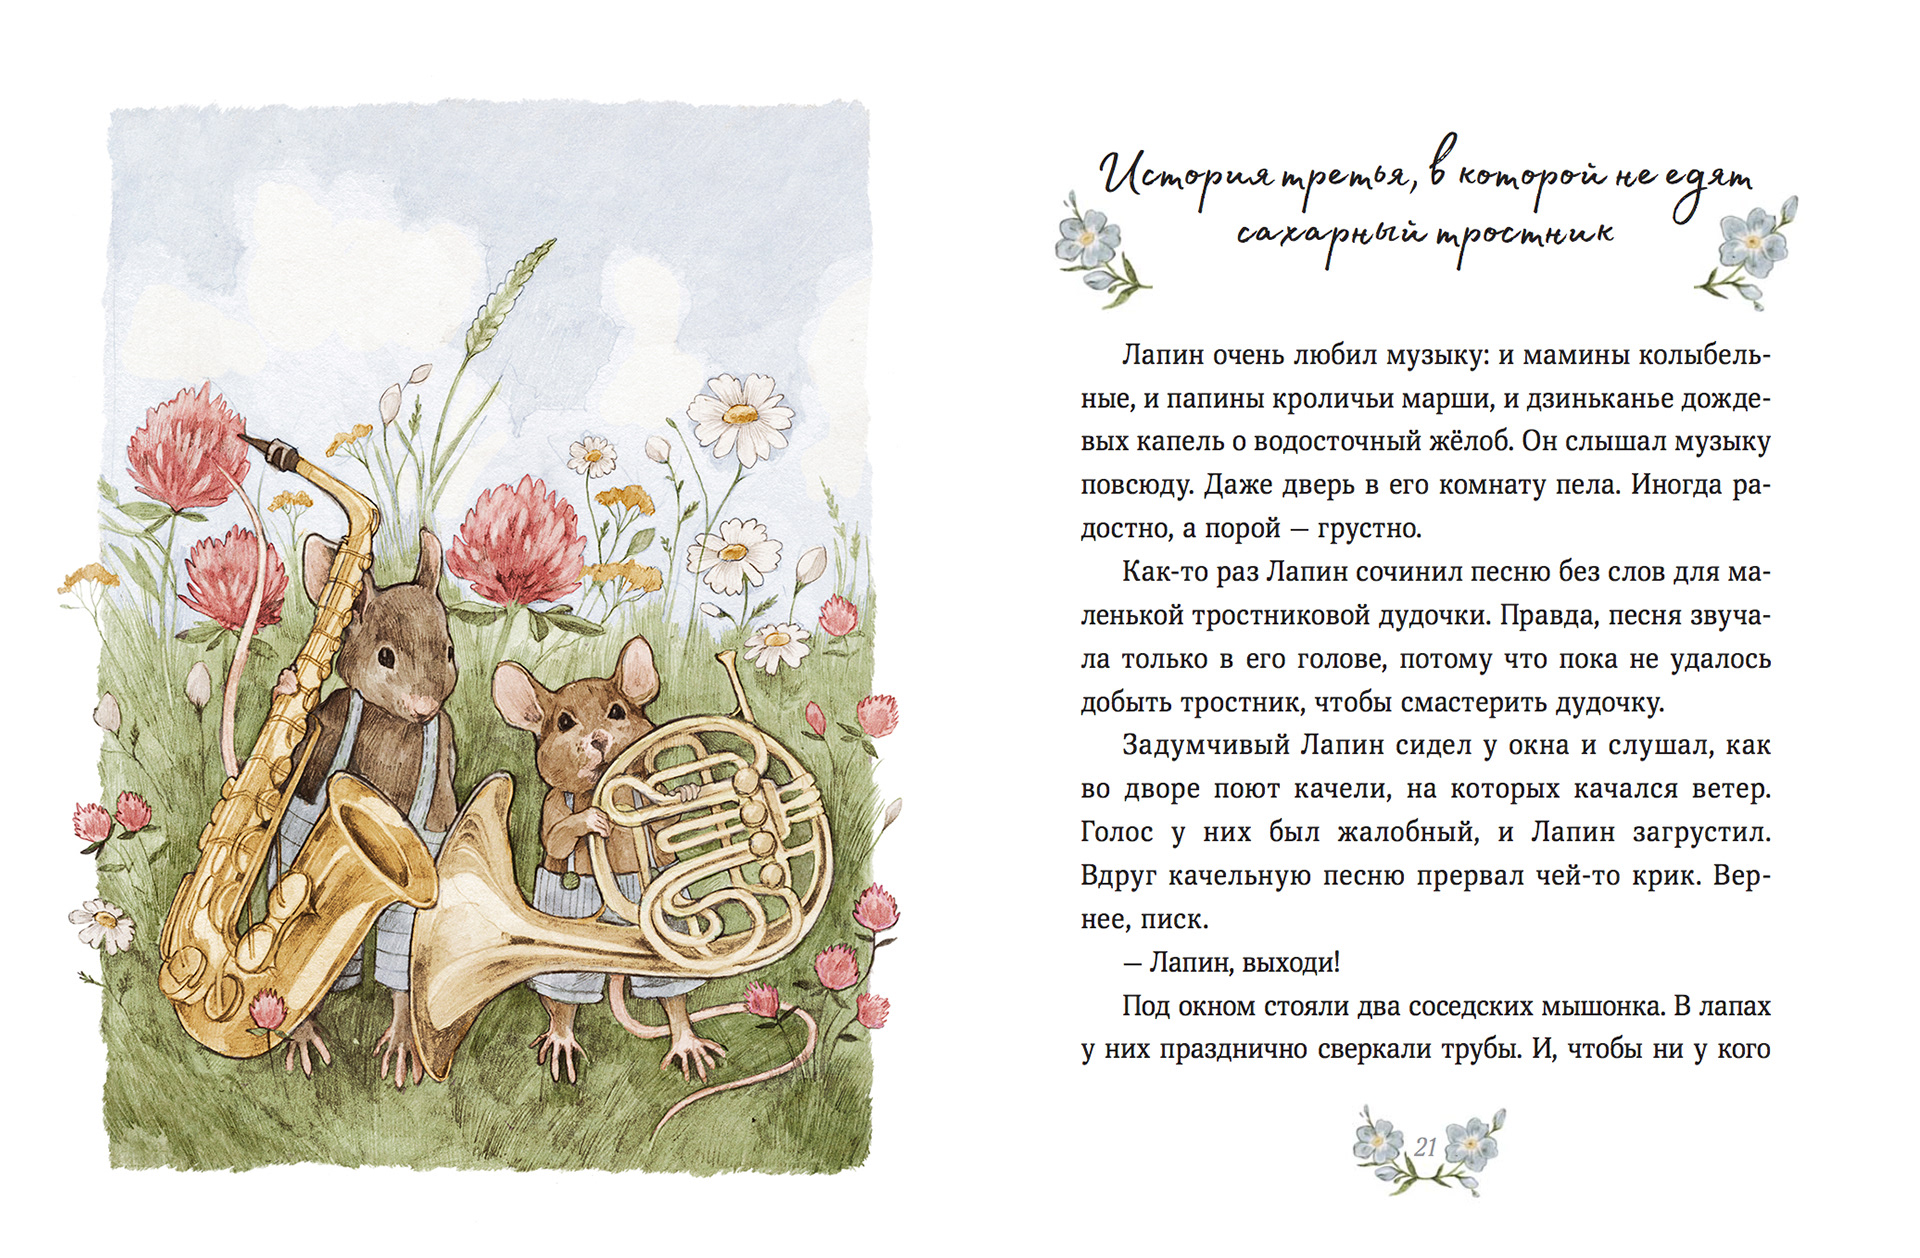 Book spread with illustration on the left and chapter beginning on the right